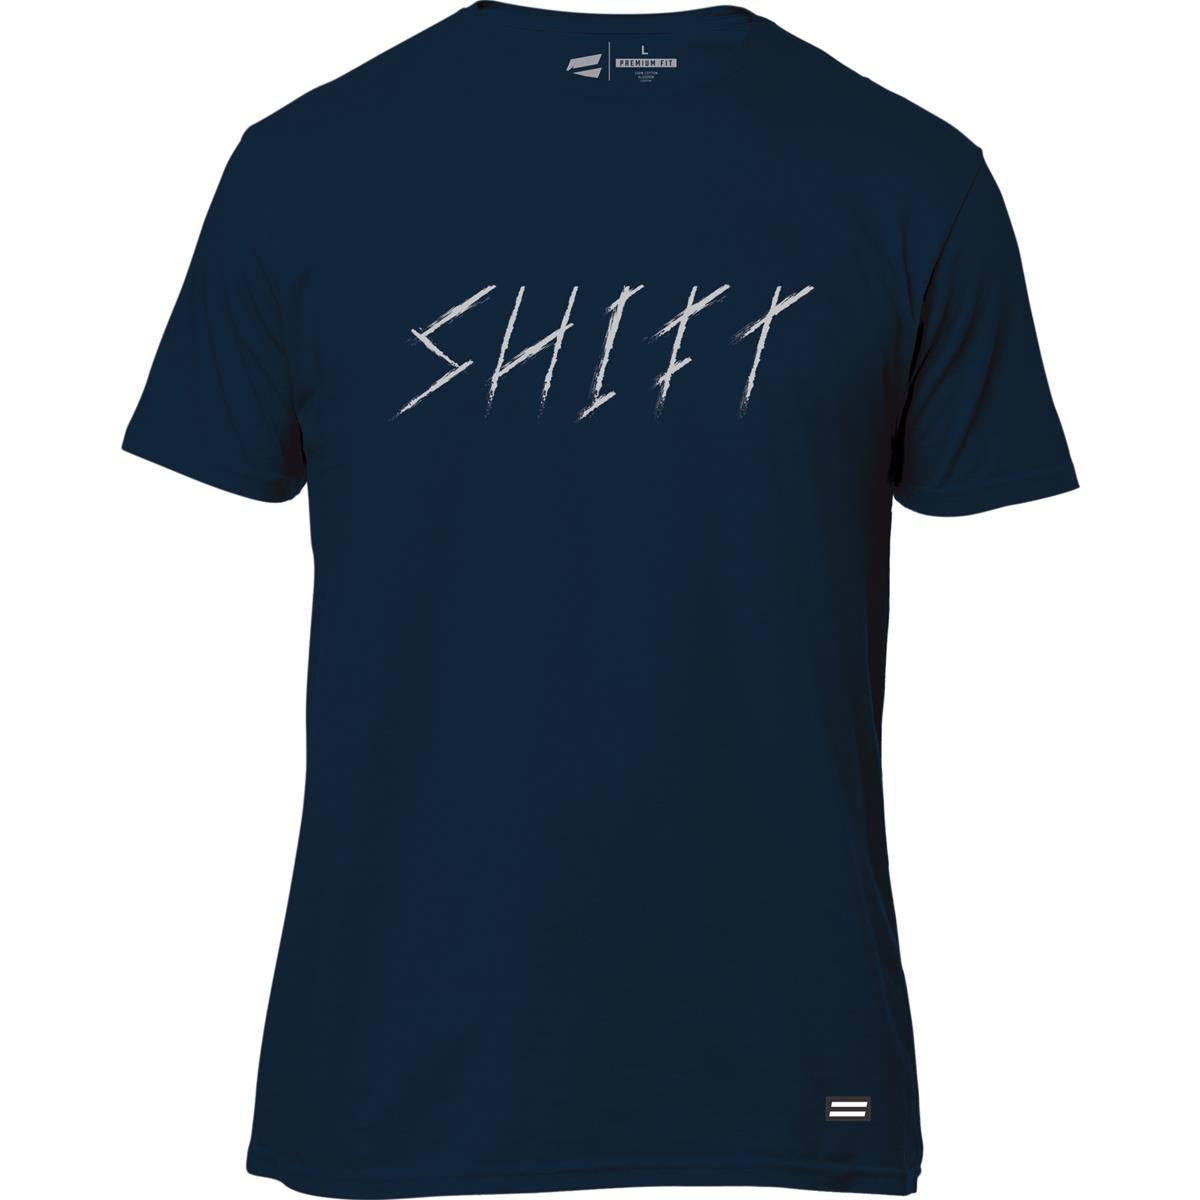 Shift T-Shirt Carved Grease Monkey